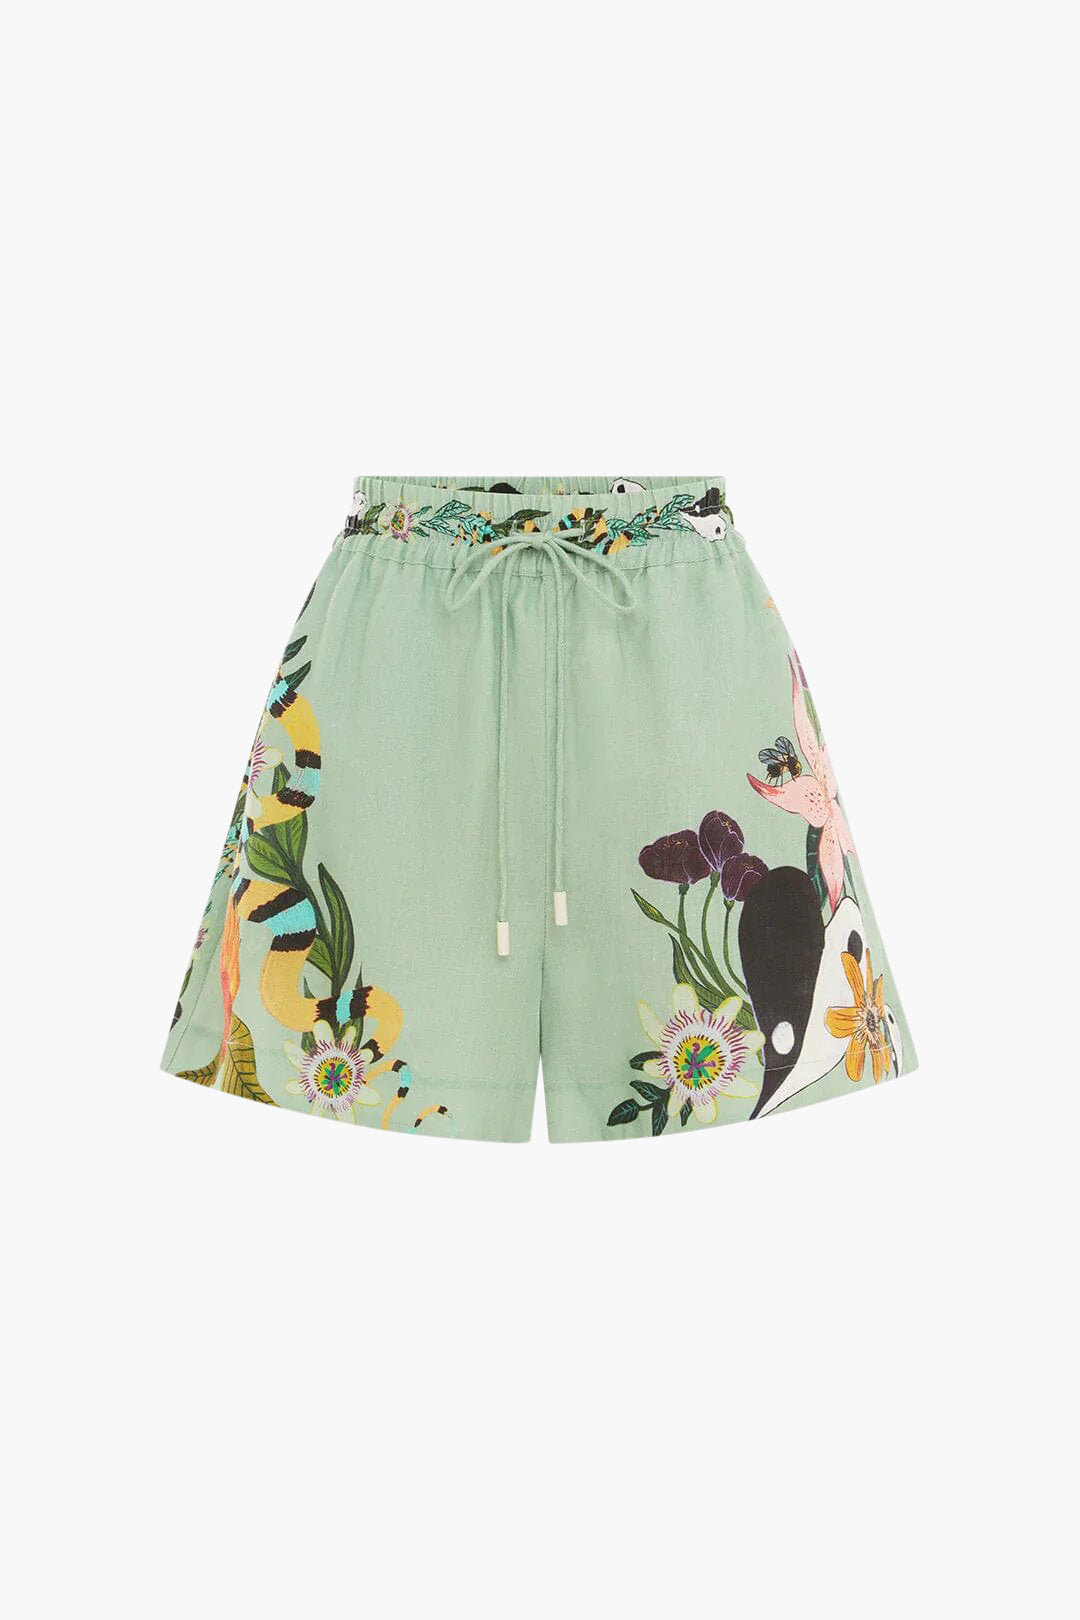 Alemais Meagan Linen Short in Jade available at The New Trend Australia.